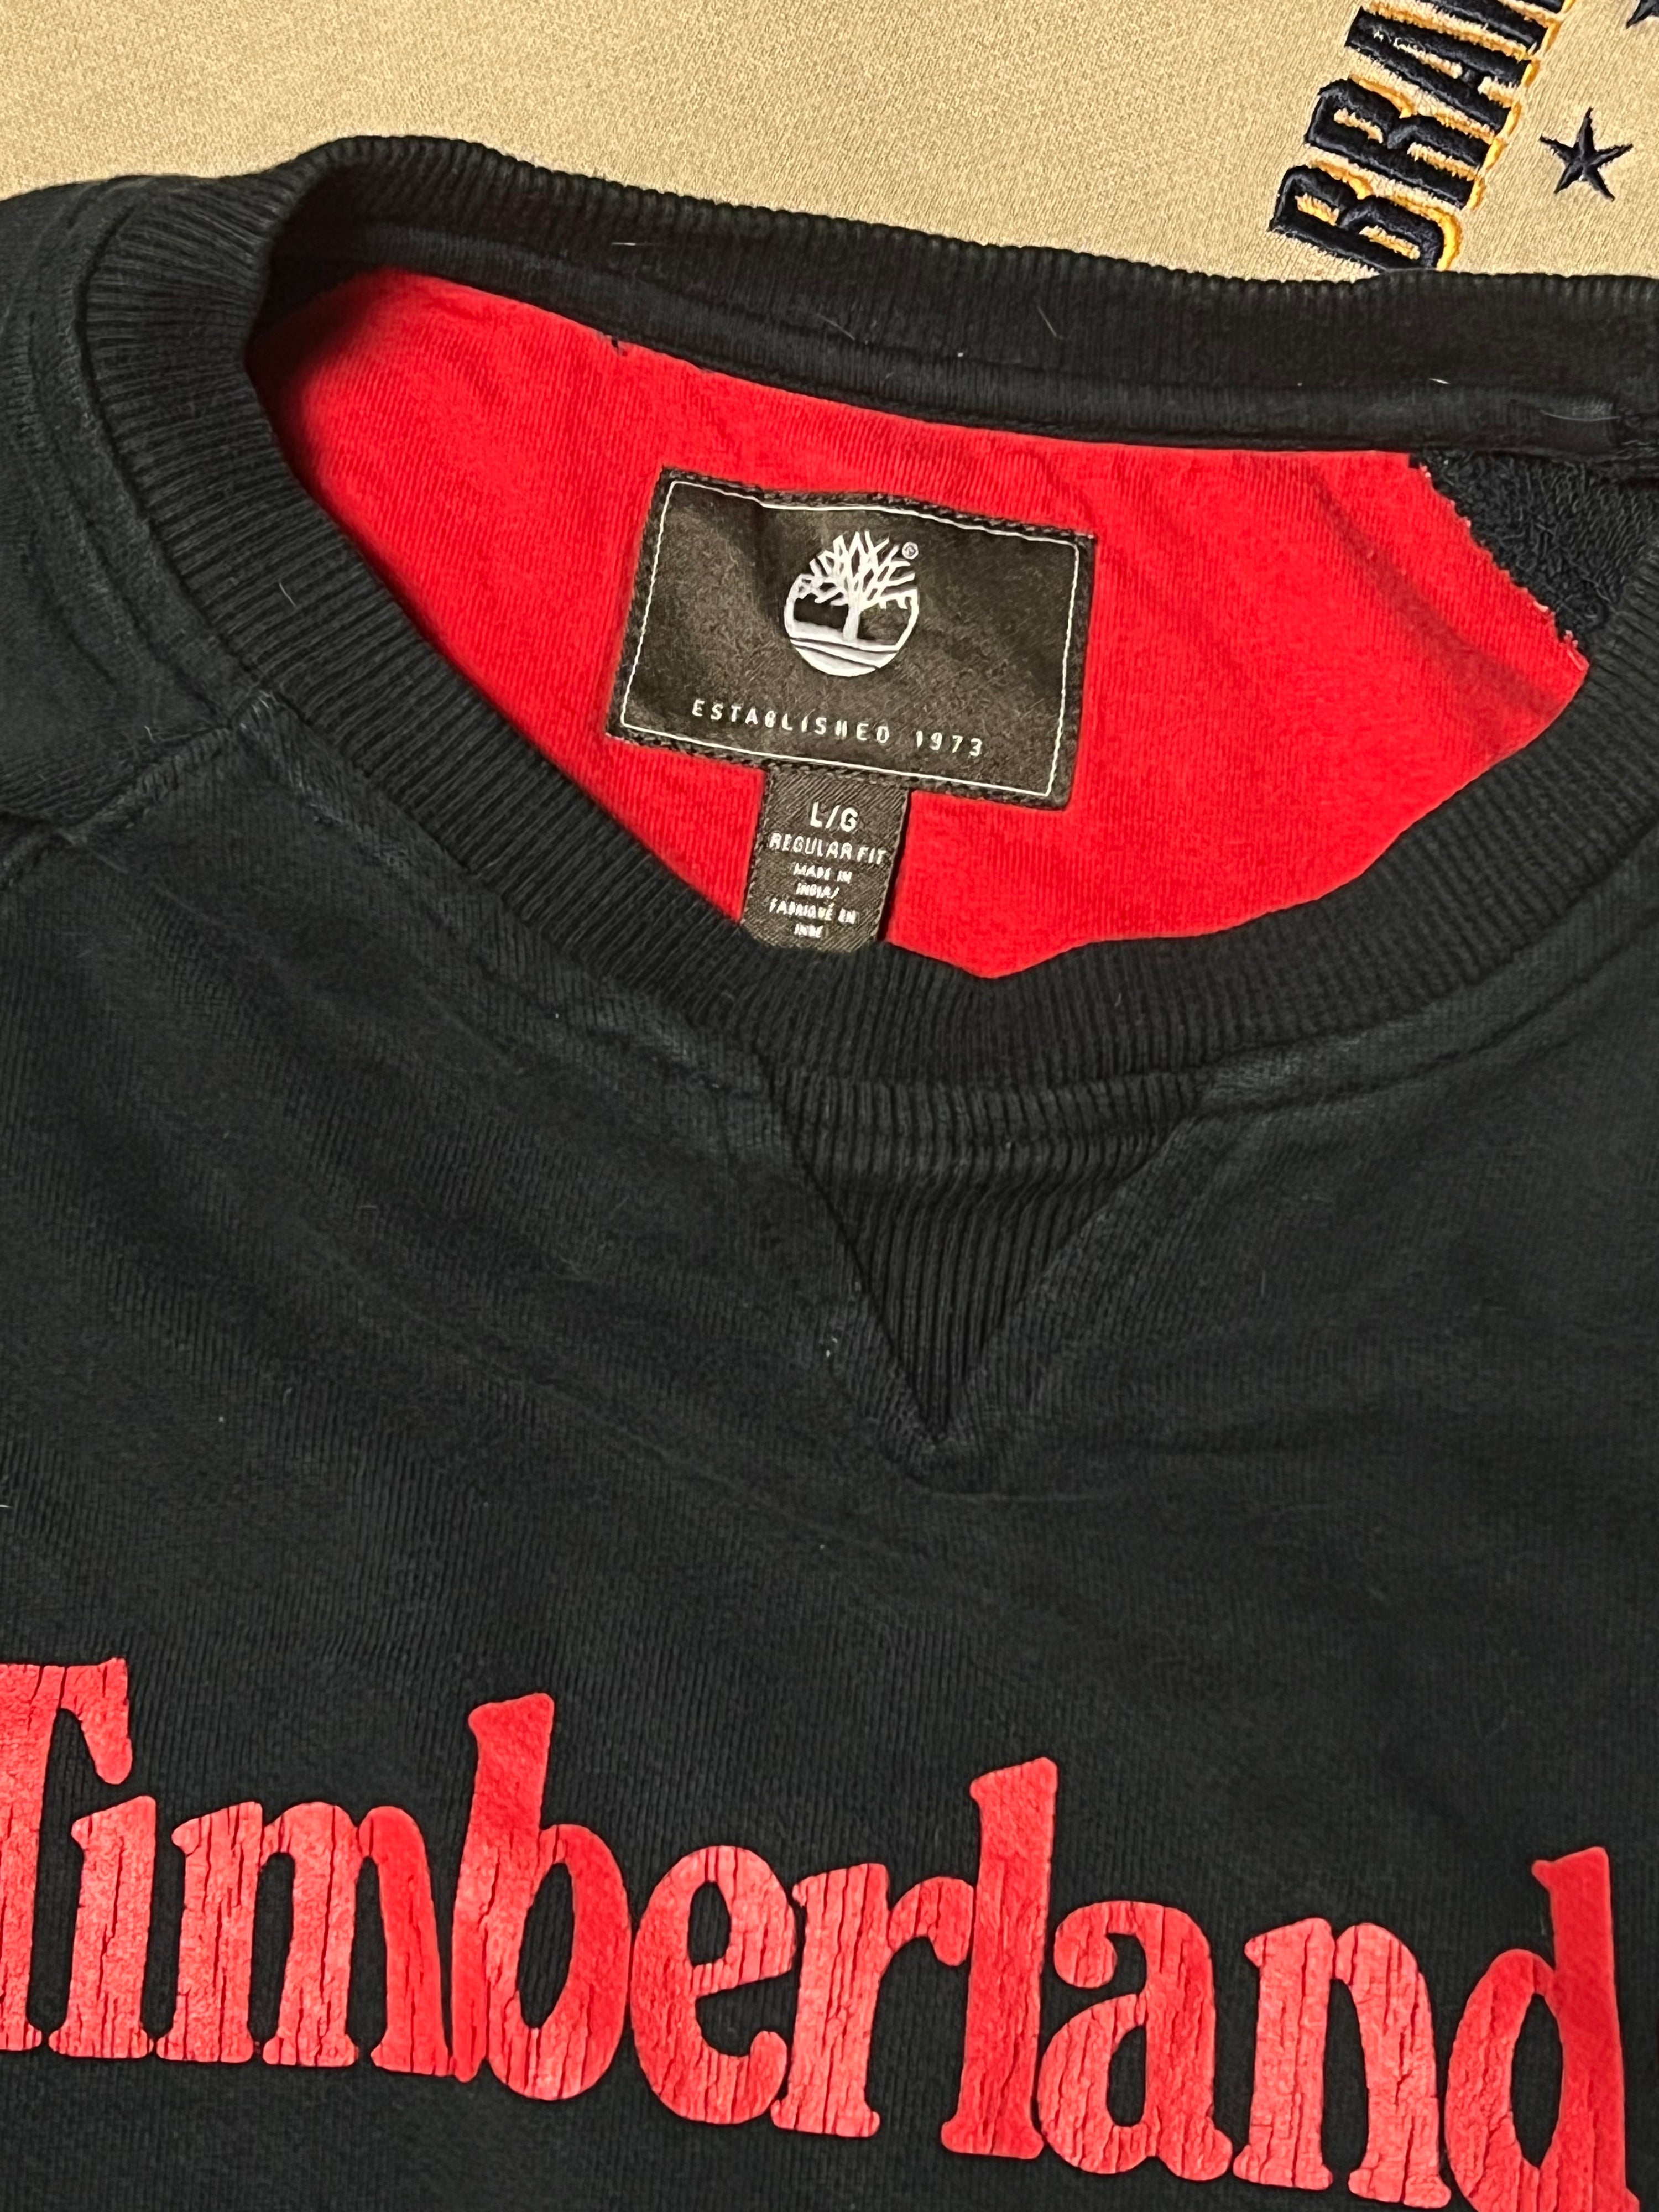 Early 2000s Timberland Logo Sweater (L)